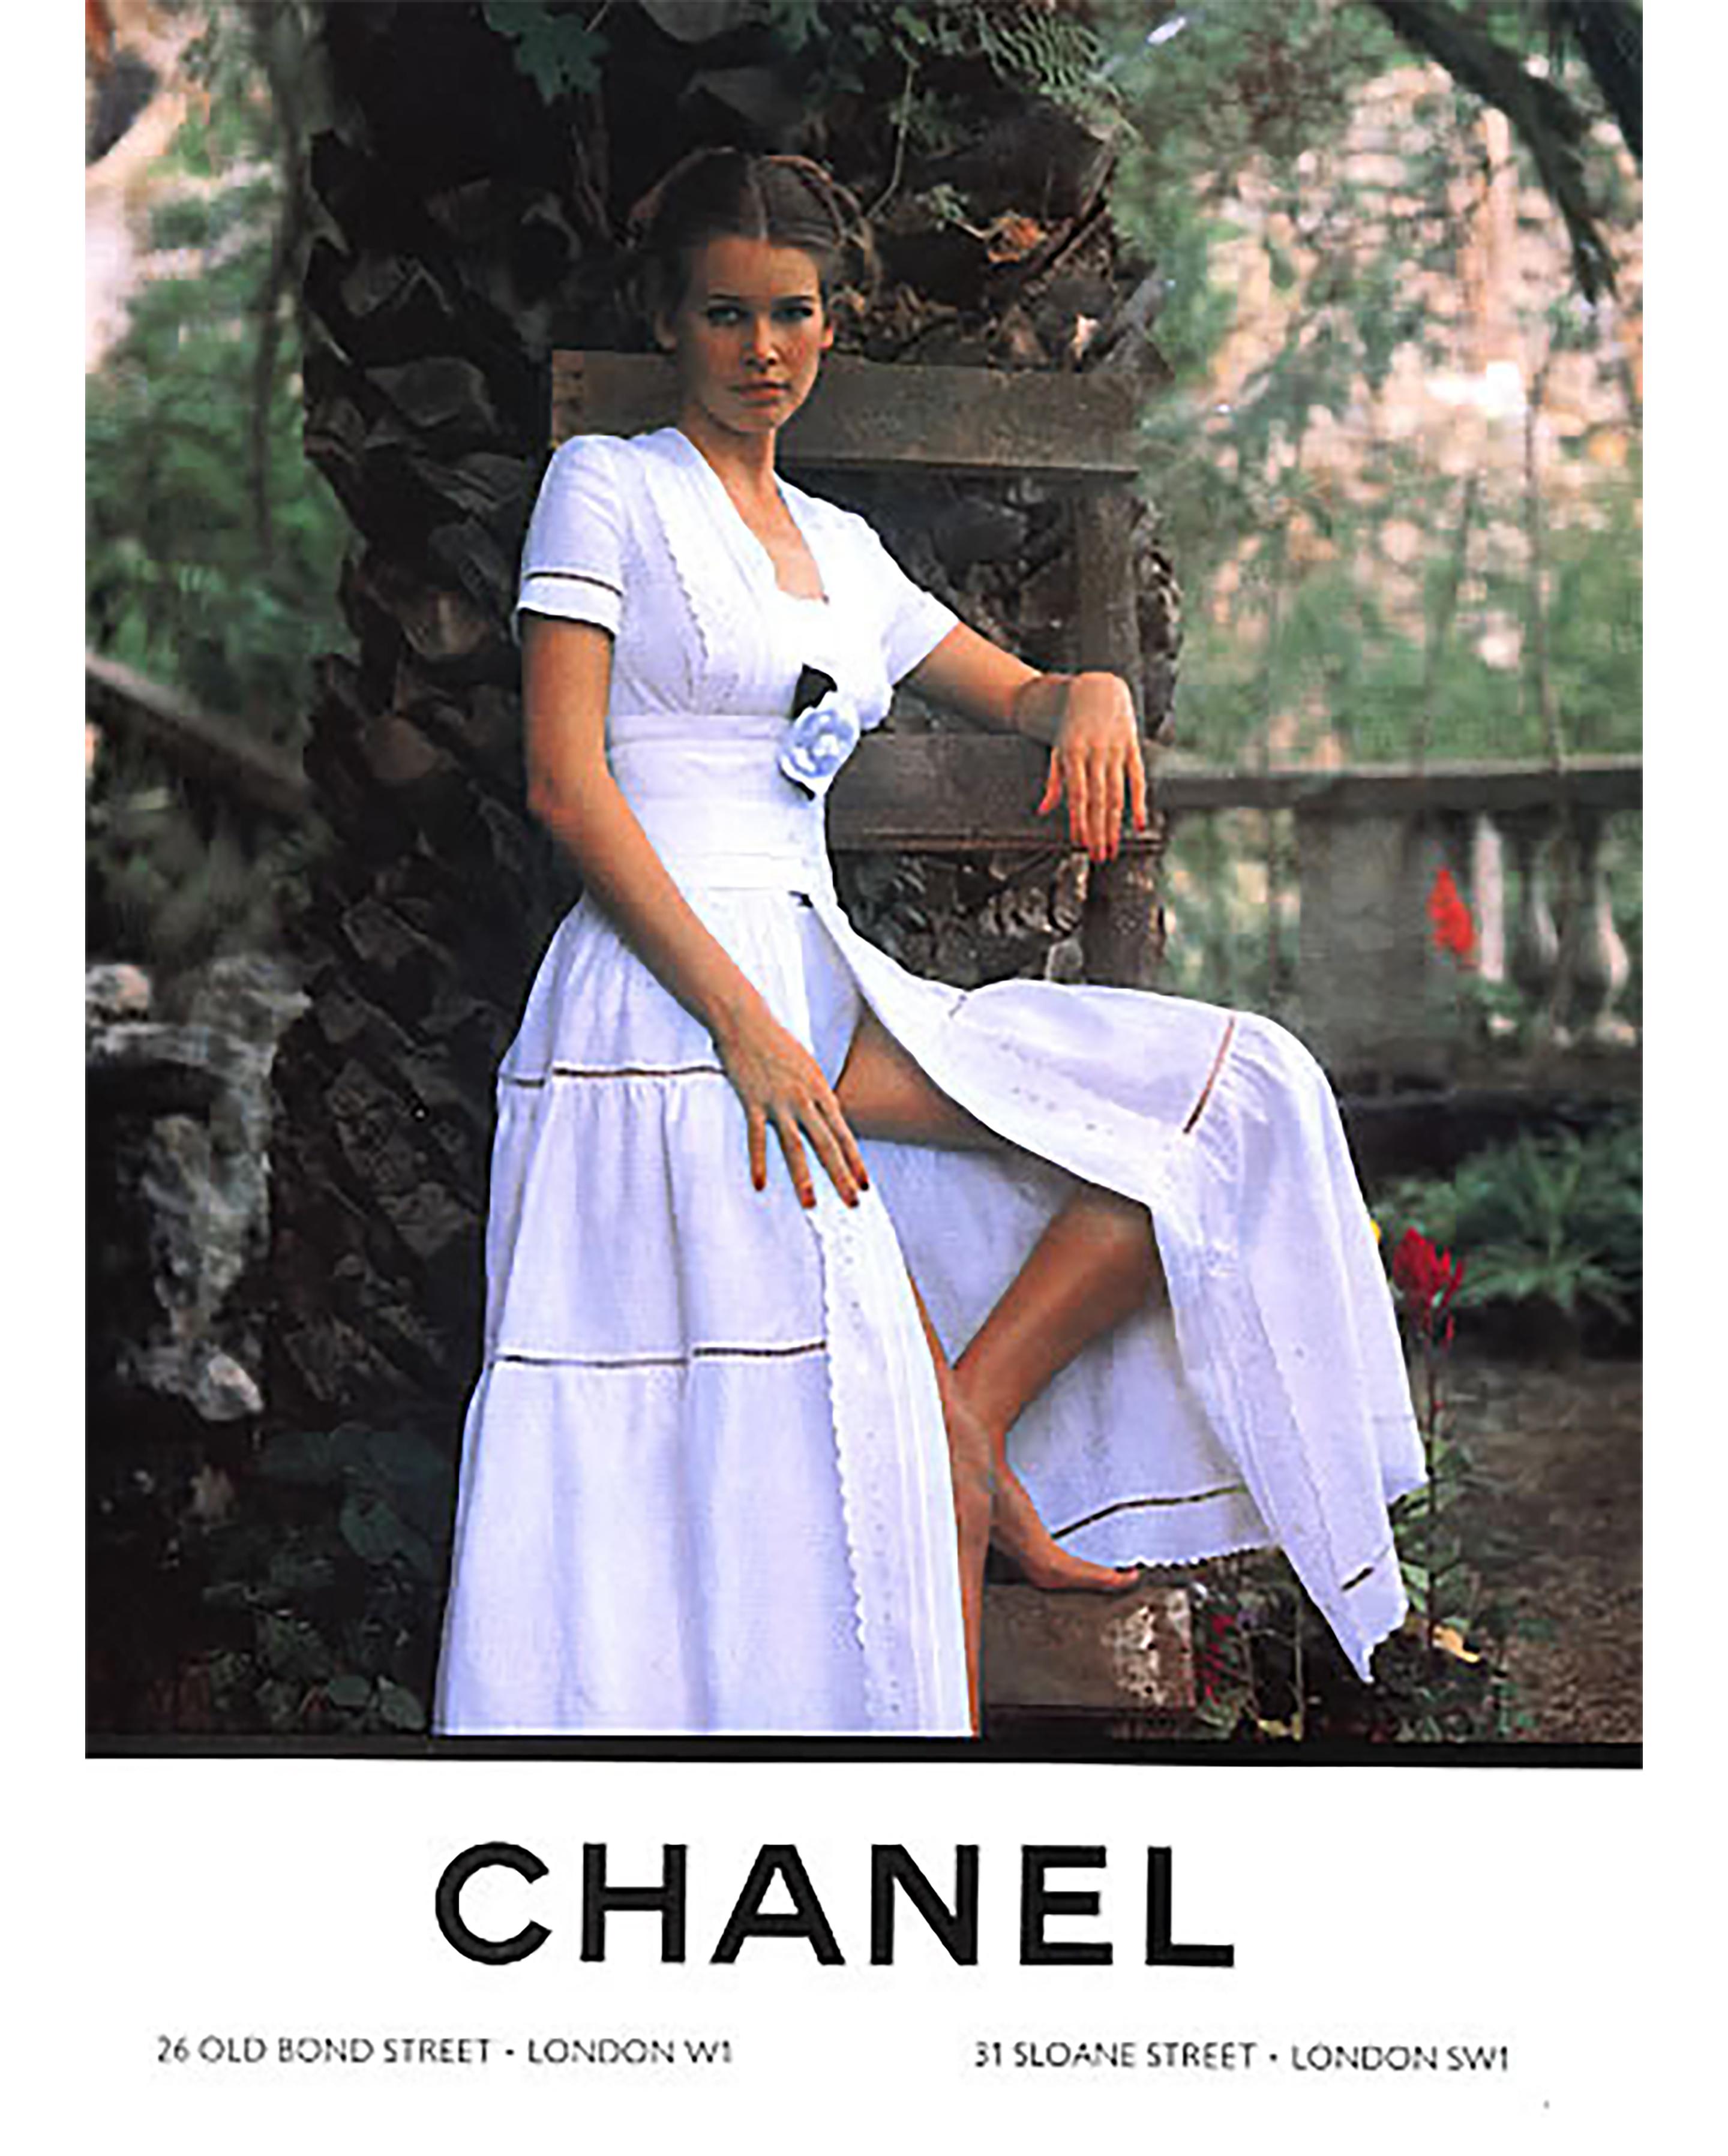 S/S 1993 Chanel Boutique by Karl Lagerfeld white strapless linen corset with built-in boning. Structured corset with scallop trim details. Stamped cream silk interior lining. As seen on Yasmeen Ghauri on the runway (Look 116), and featured in the ad